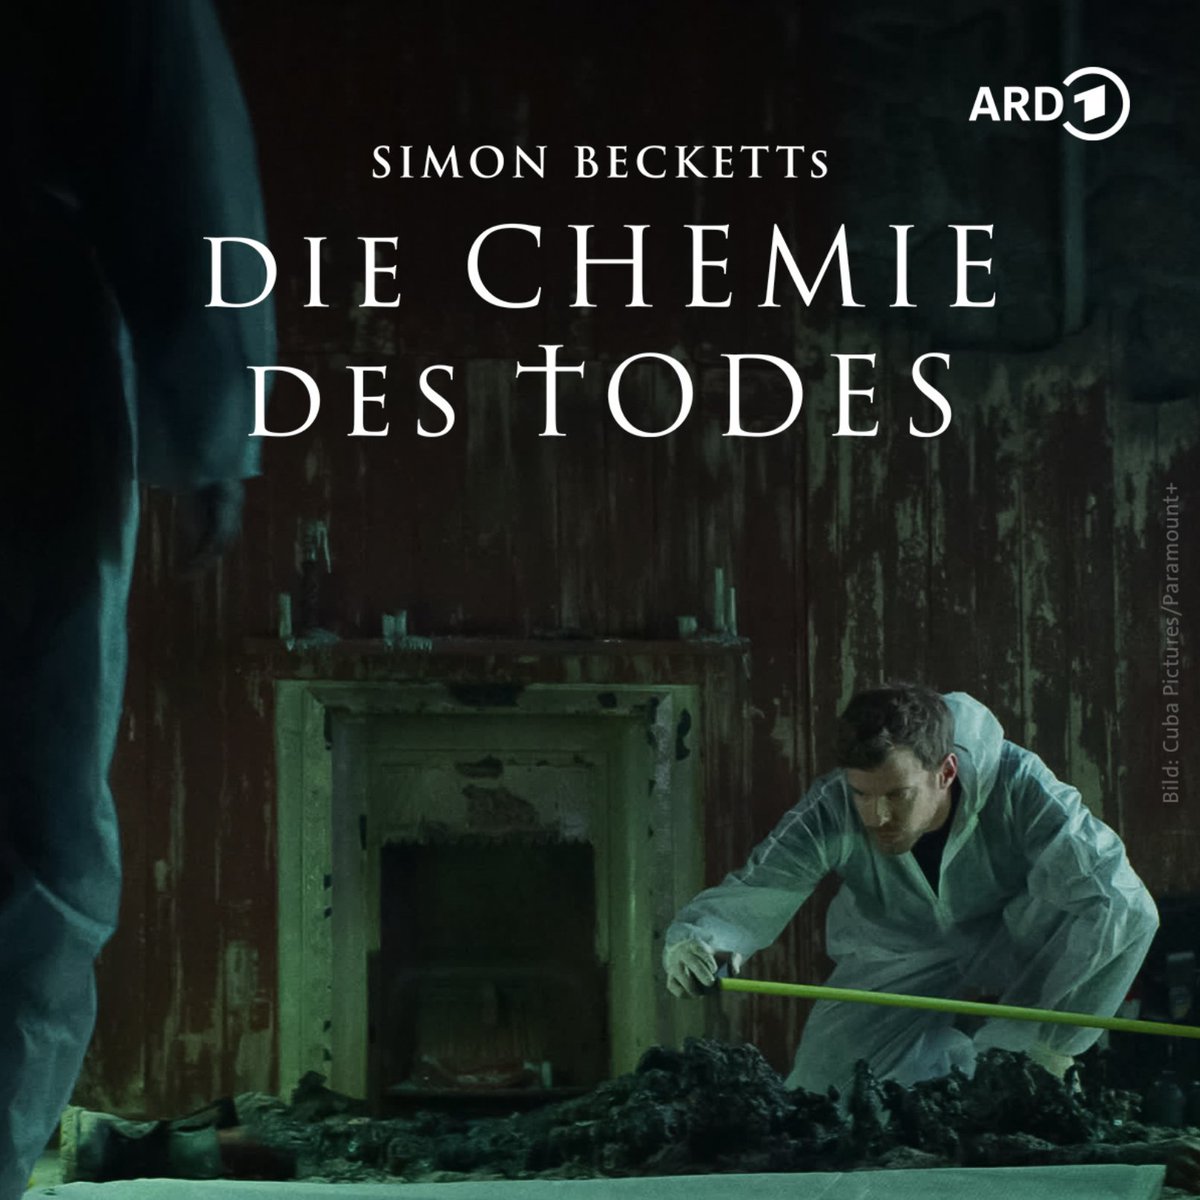 German readers: You are now able to stream all episodes of 'Die Chemie des Todes' on ARD. You can view the whole series at: 1.ard.de/die-chemie-des……… (also available in the original English language version).